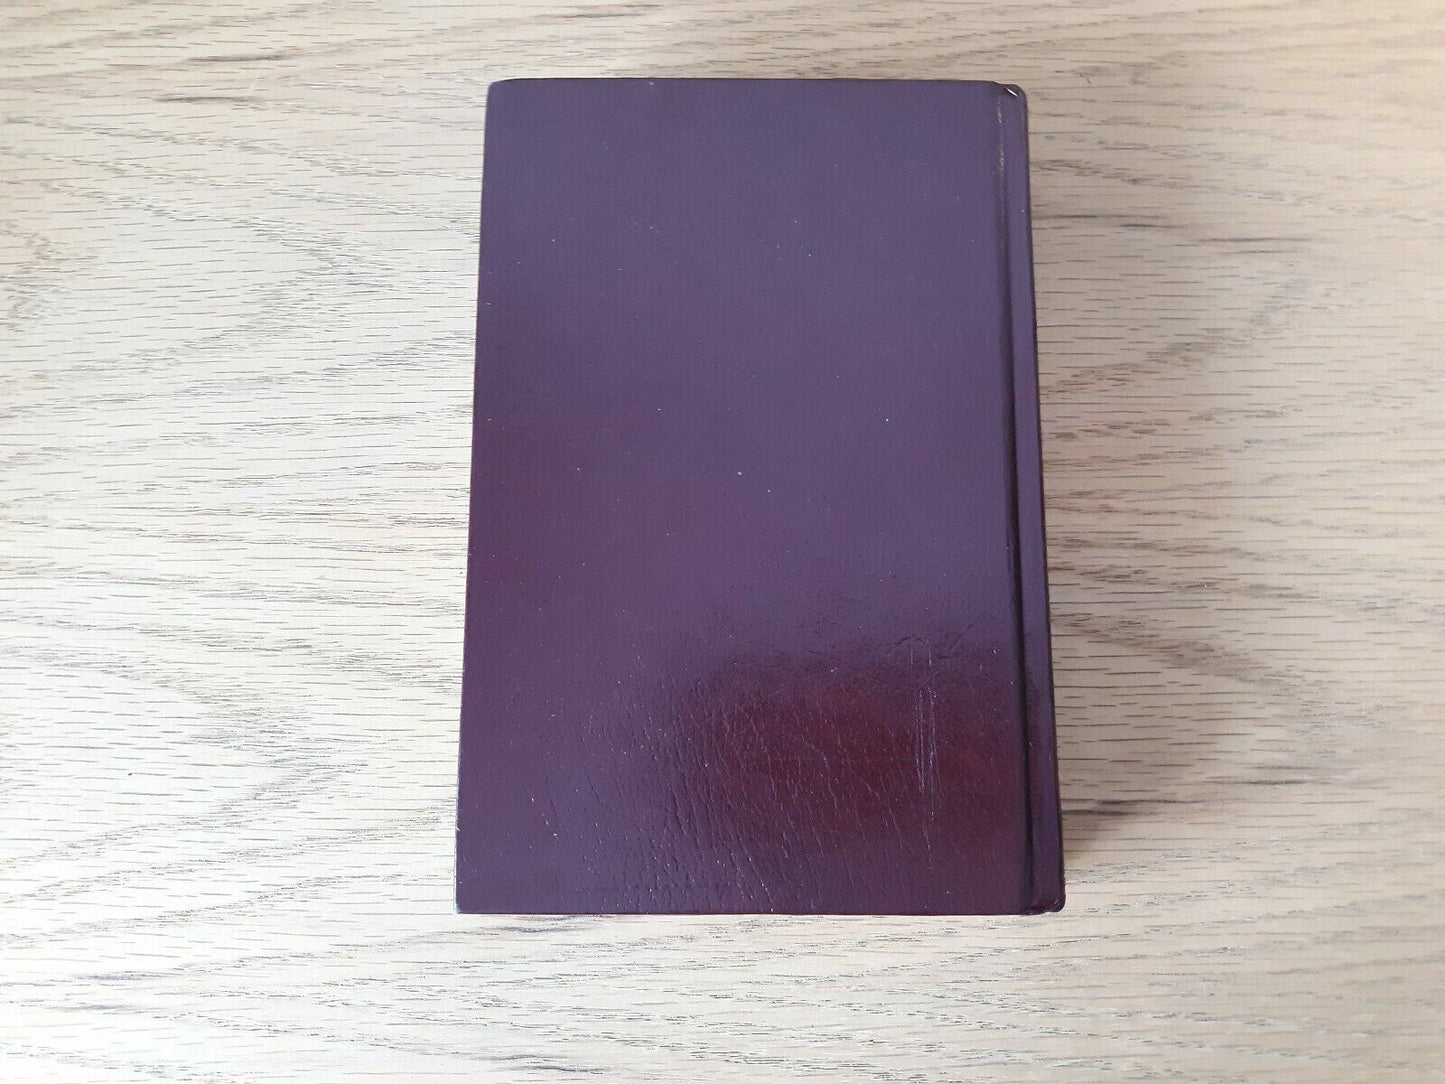 Holy Bible Placed by The Gideons 1985 International Hardcover